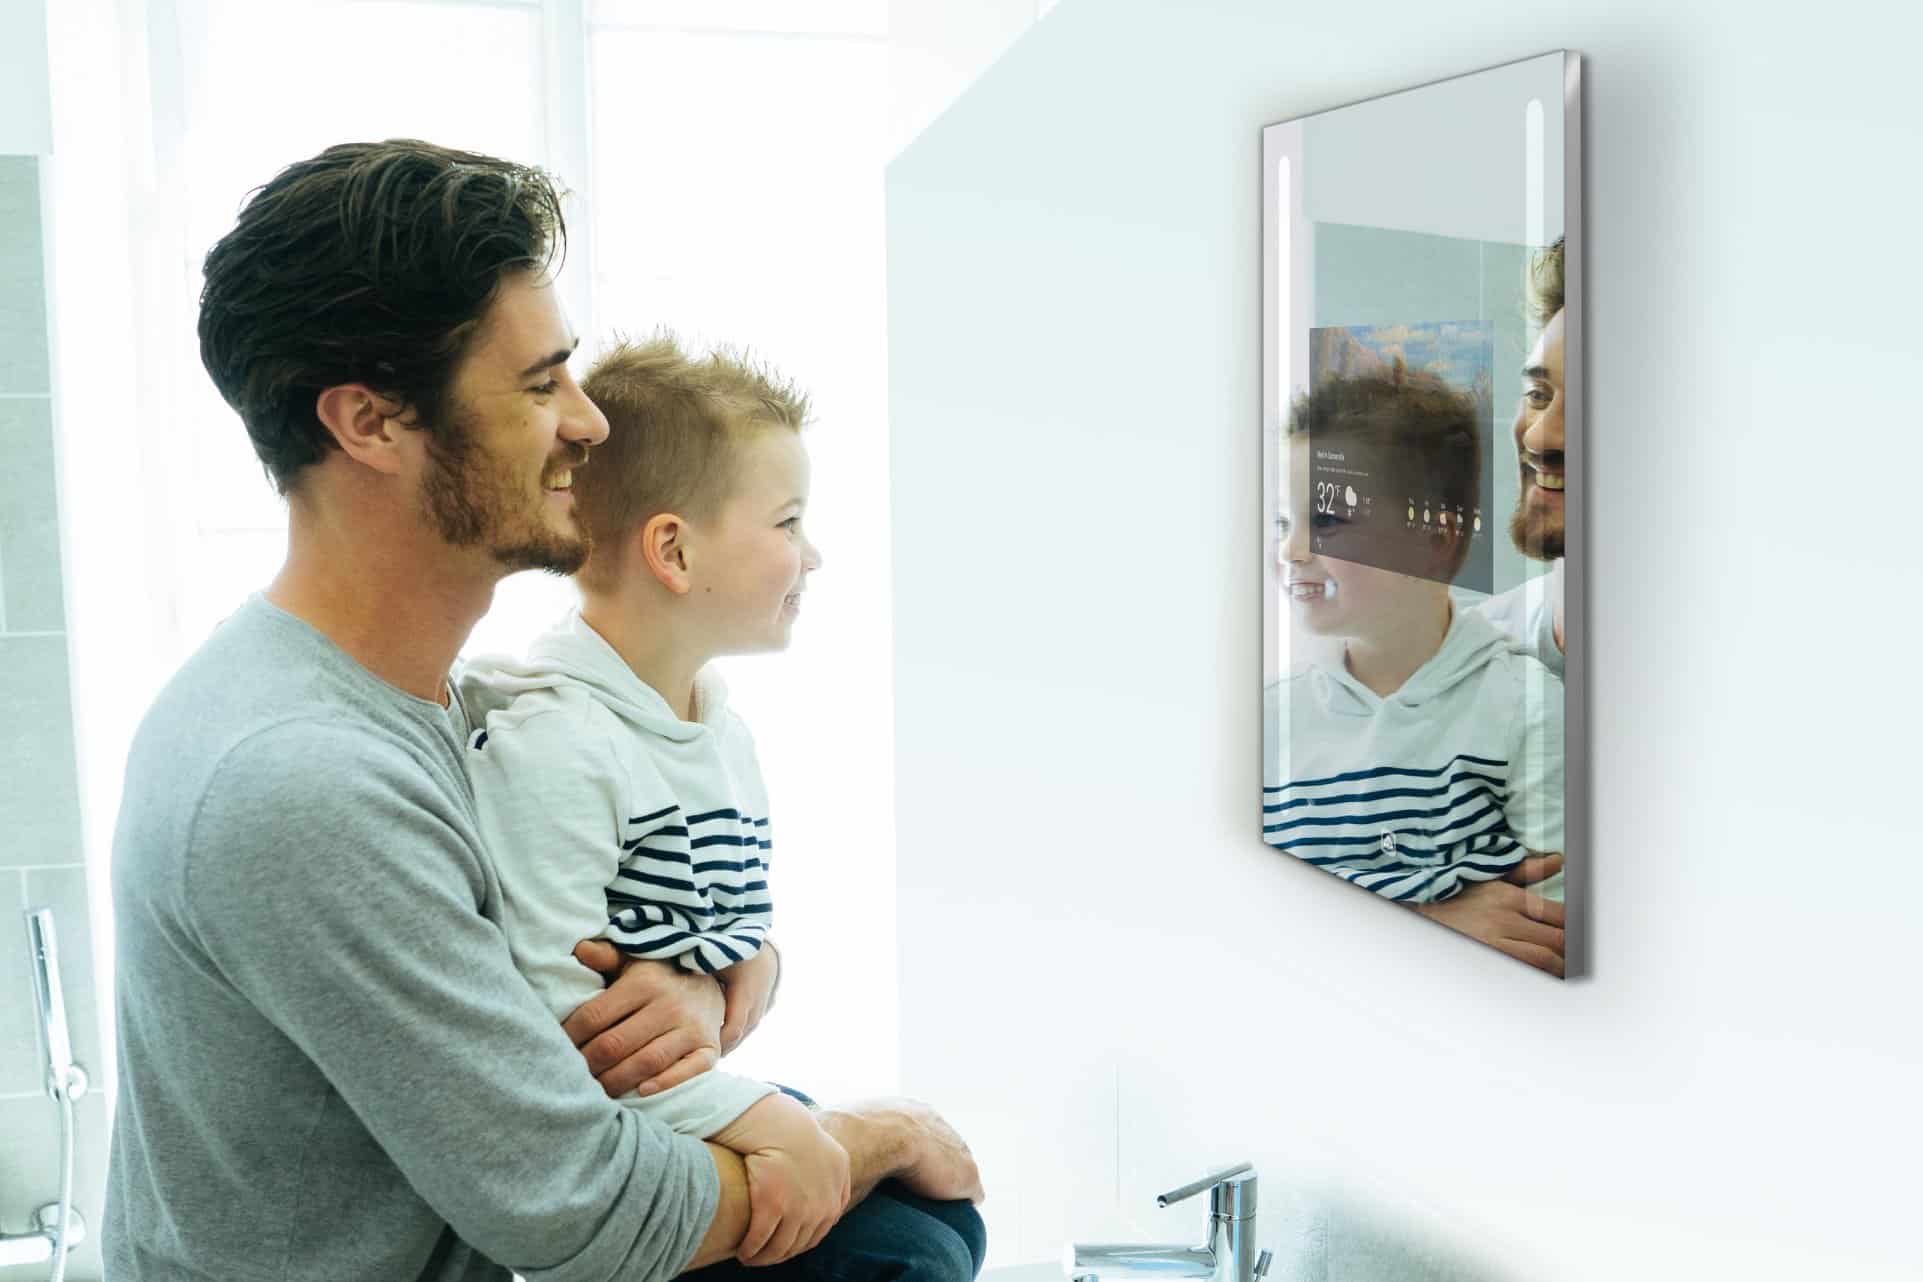 Get weather, news and more from the smart mirror on the wall